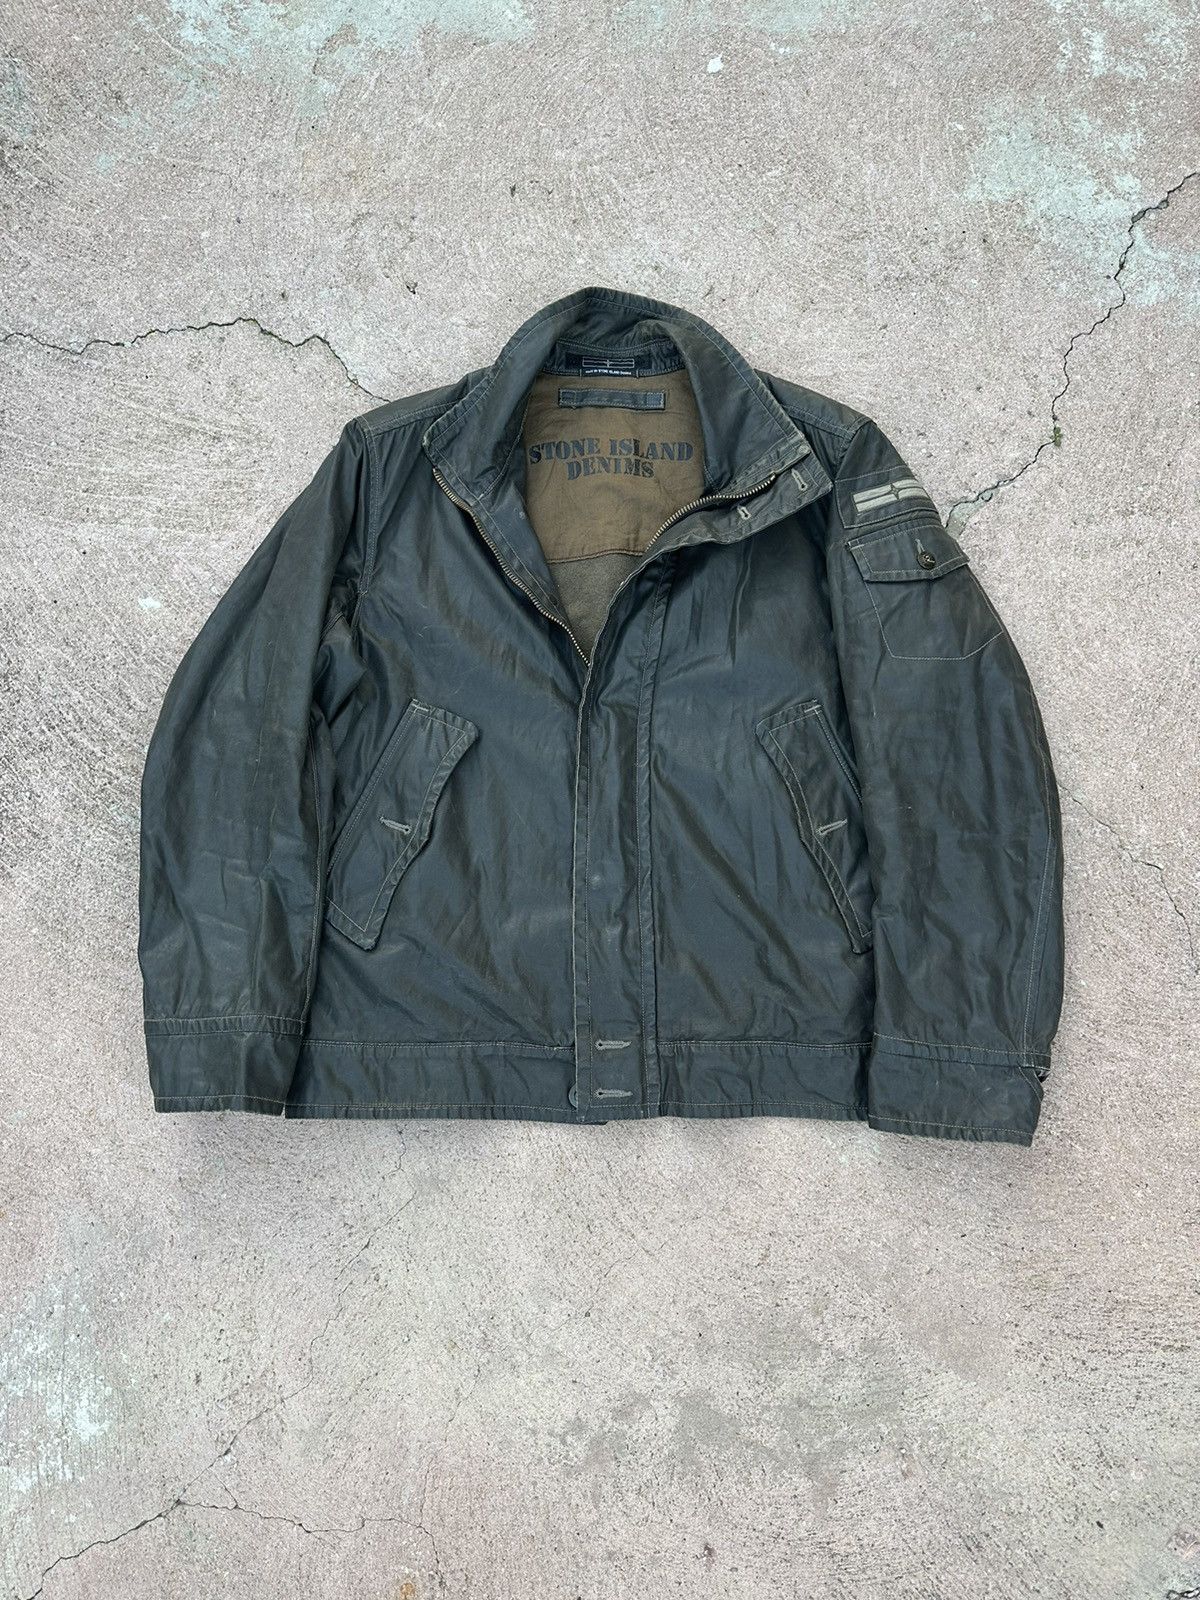 Men's Stone Island Leather Jackets | Grailed